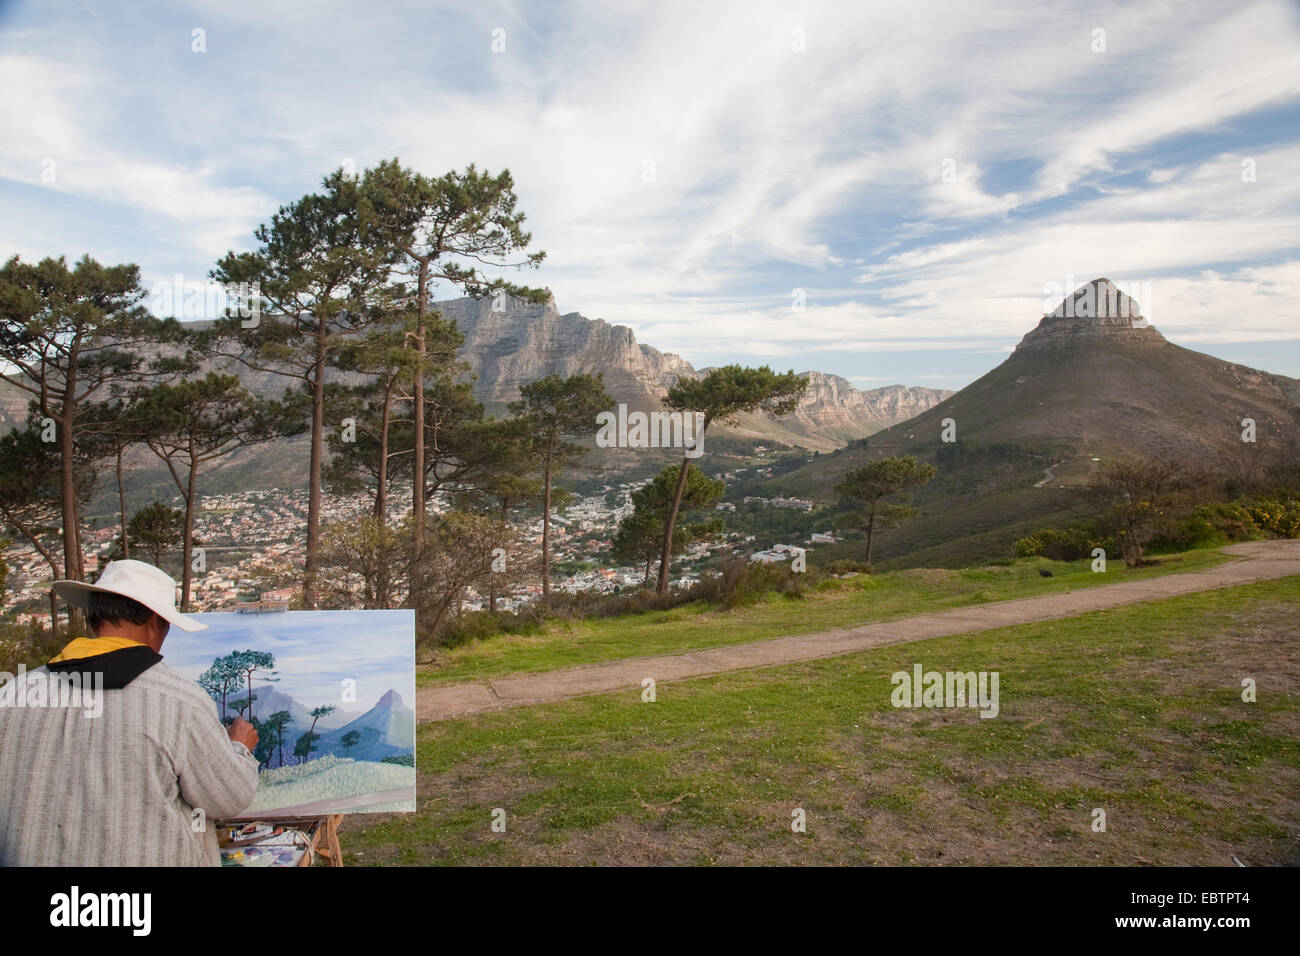 painter with easel painting Lion's Head and table mountain, South Africa, Western Cape, Capetown Stock Photo